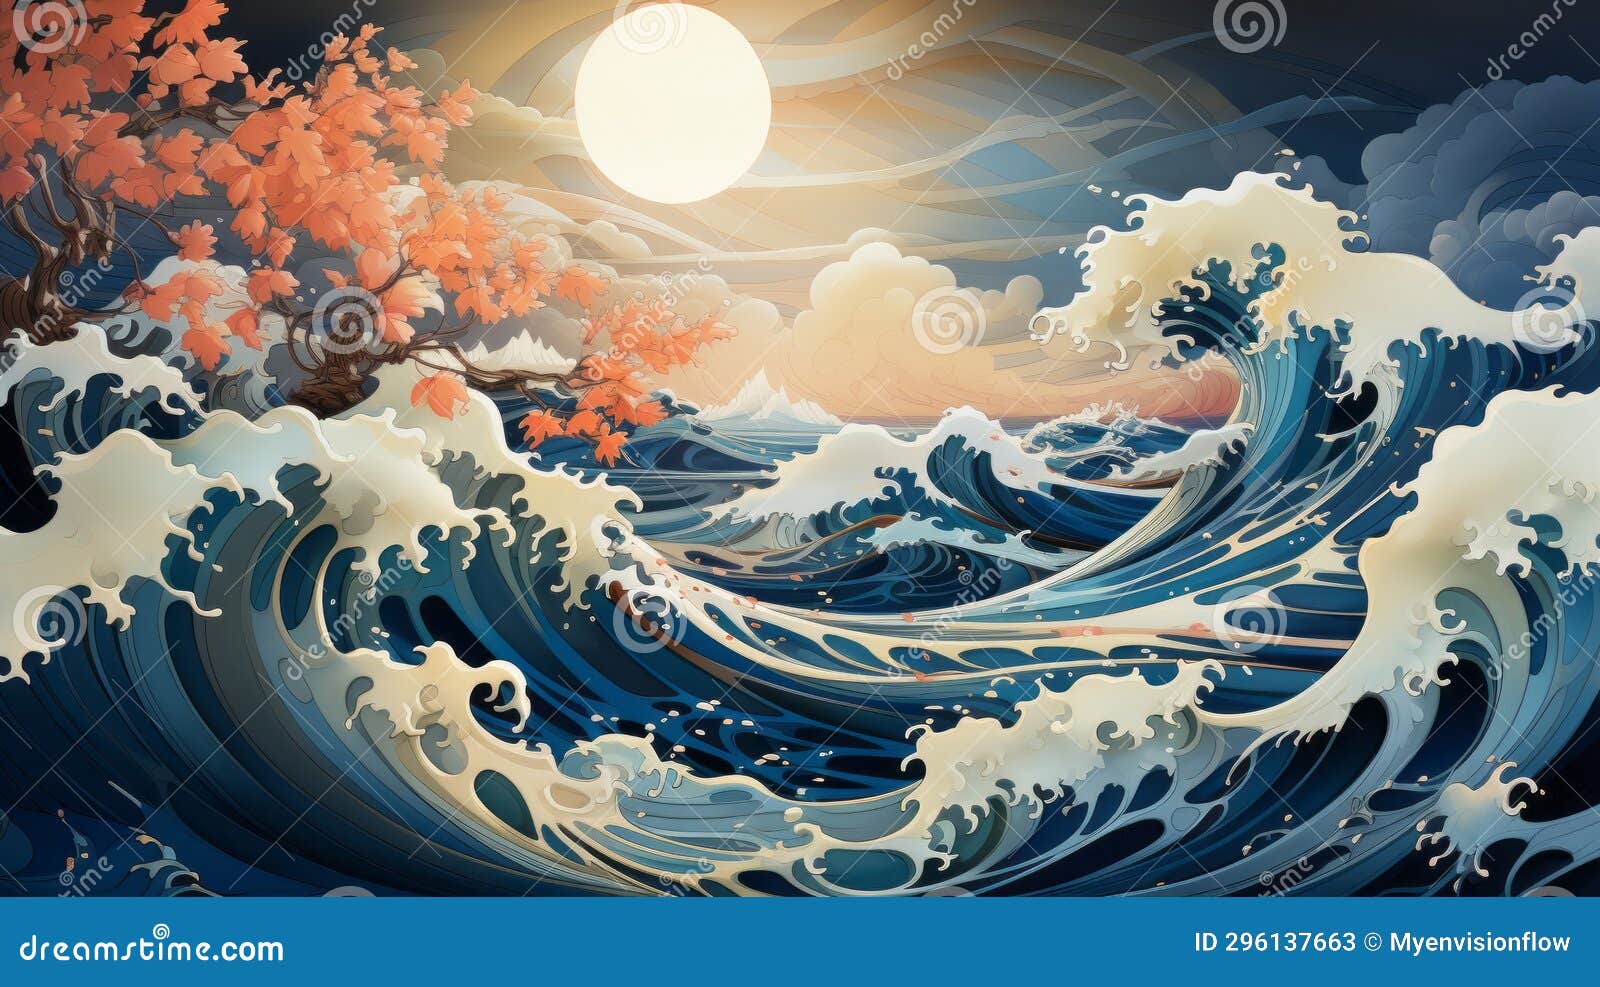 Ocean Waves On The Beach Inspired By Anime Style